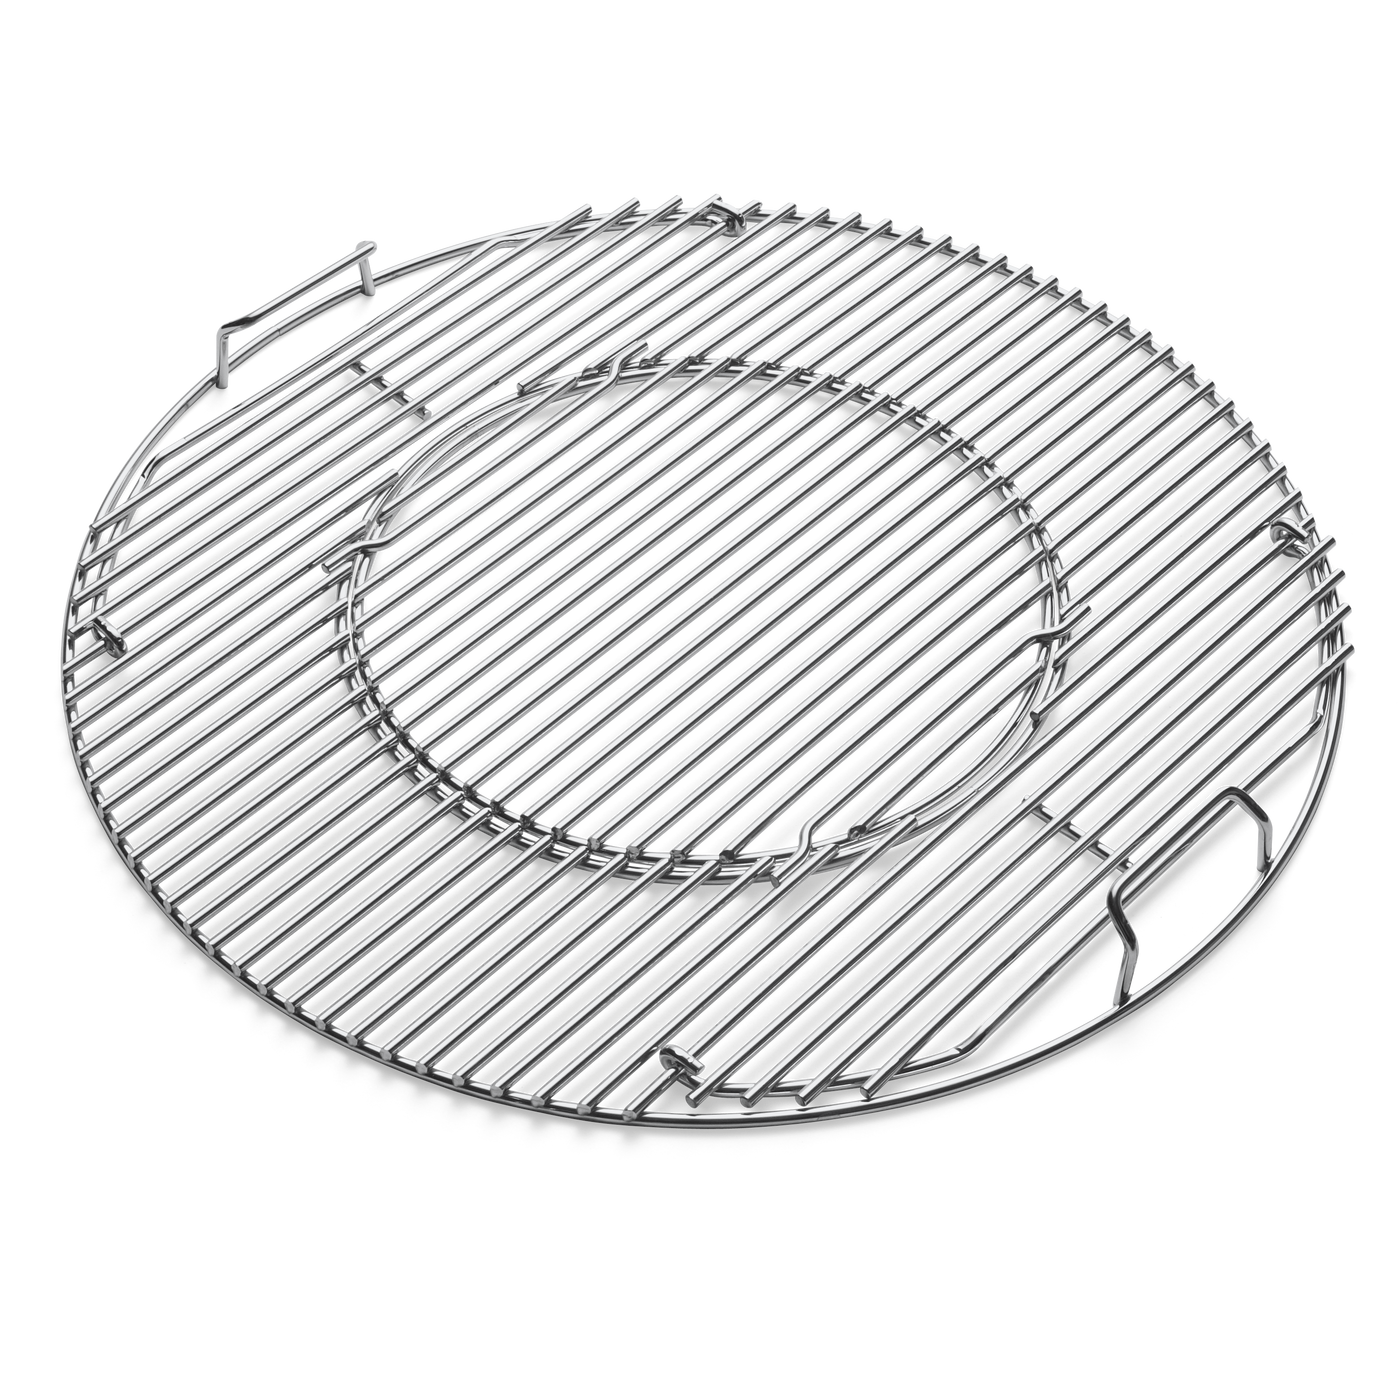 Cooking Grate - Fits 57cm Charcoal Barbecues